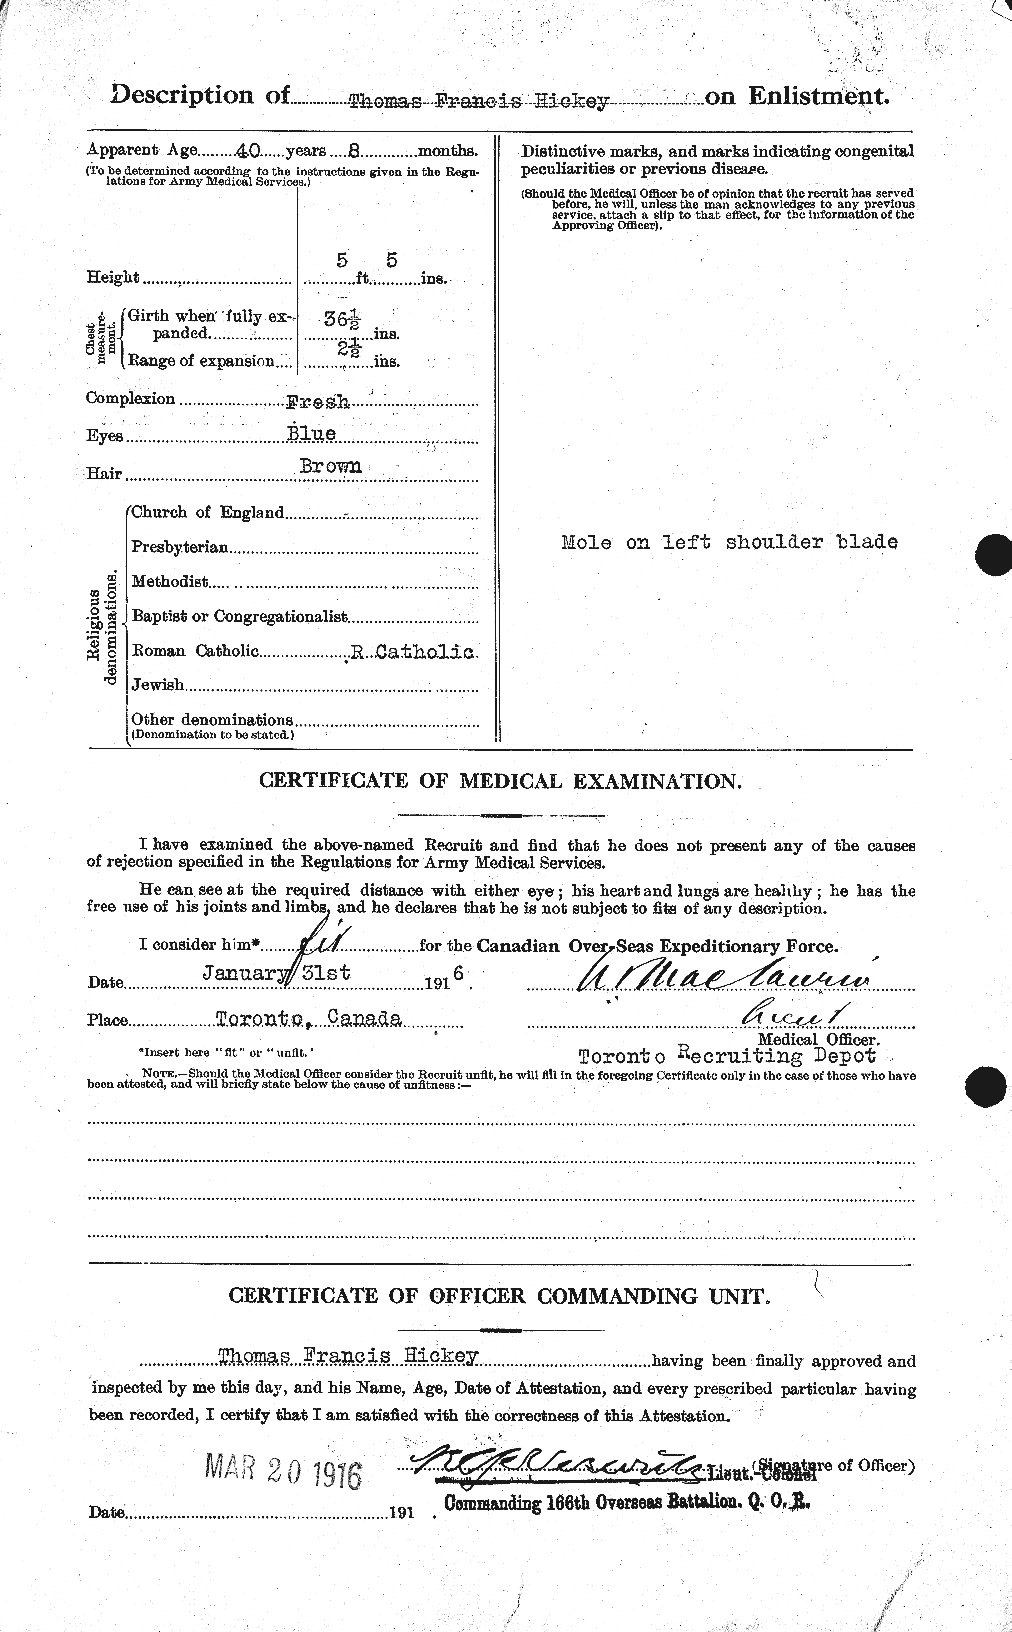 Personnel Records of the First World War - CEF 388925b